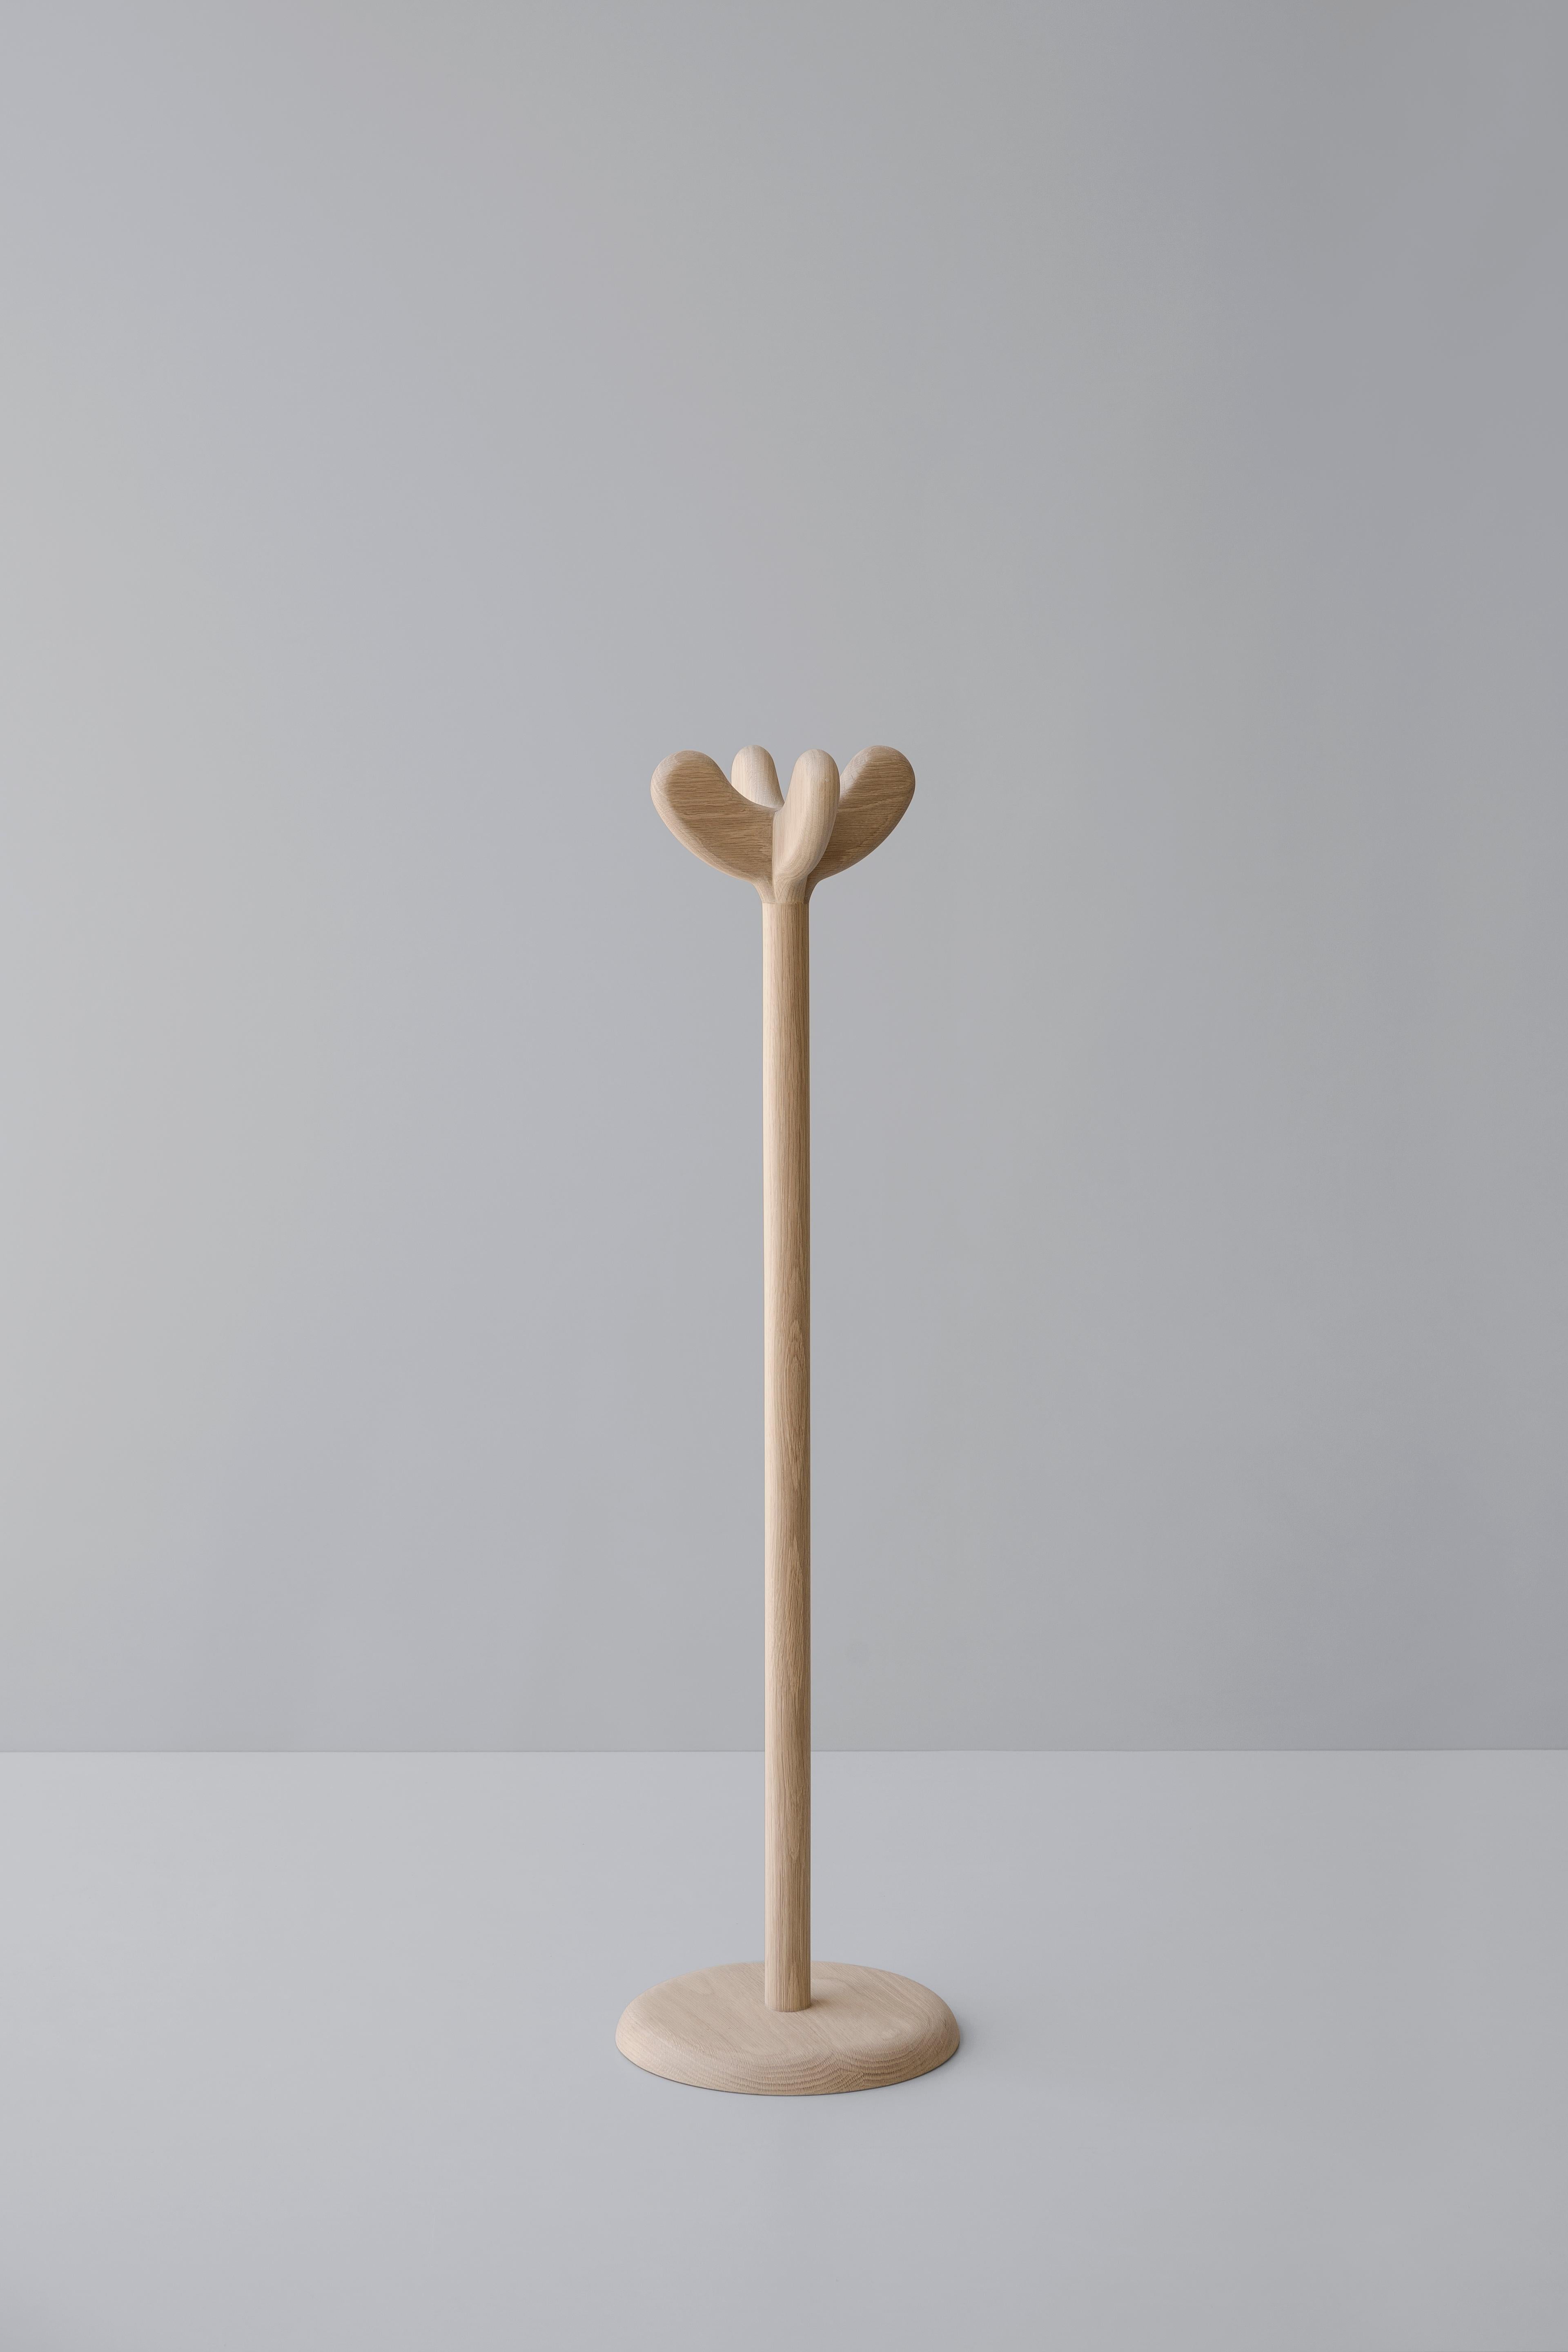 Trasiego coat rack by Arturo Verástegui
Dimensions: D 30 x W 30 x H 110 cm
Materials: oak wood.

Natural White oak coat rack.

Sebastián Angeles is an Industrial Designer originally from Mexico City who graduated from the Anáhuac Mexico